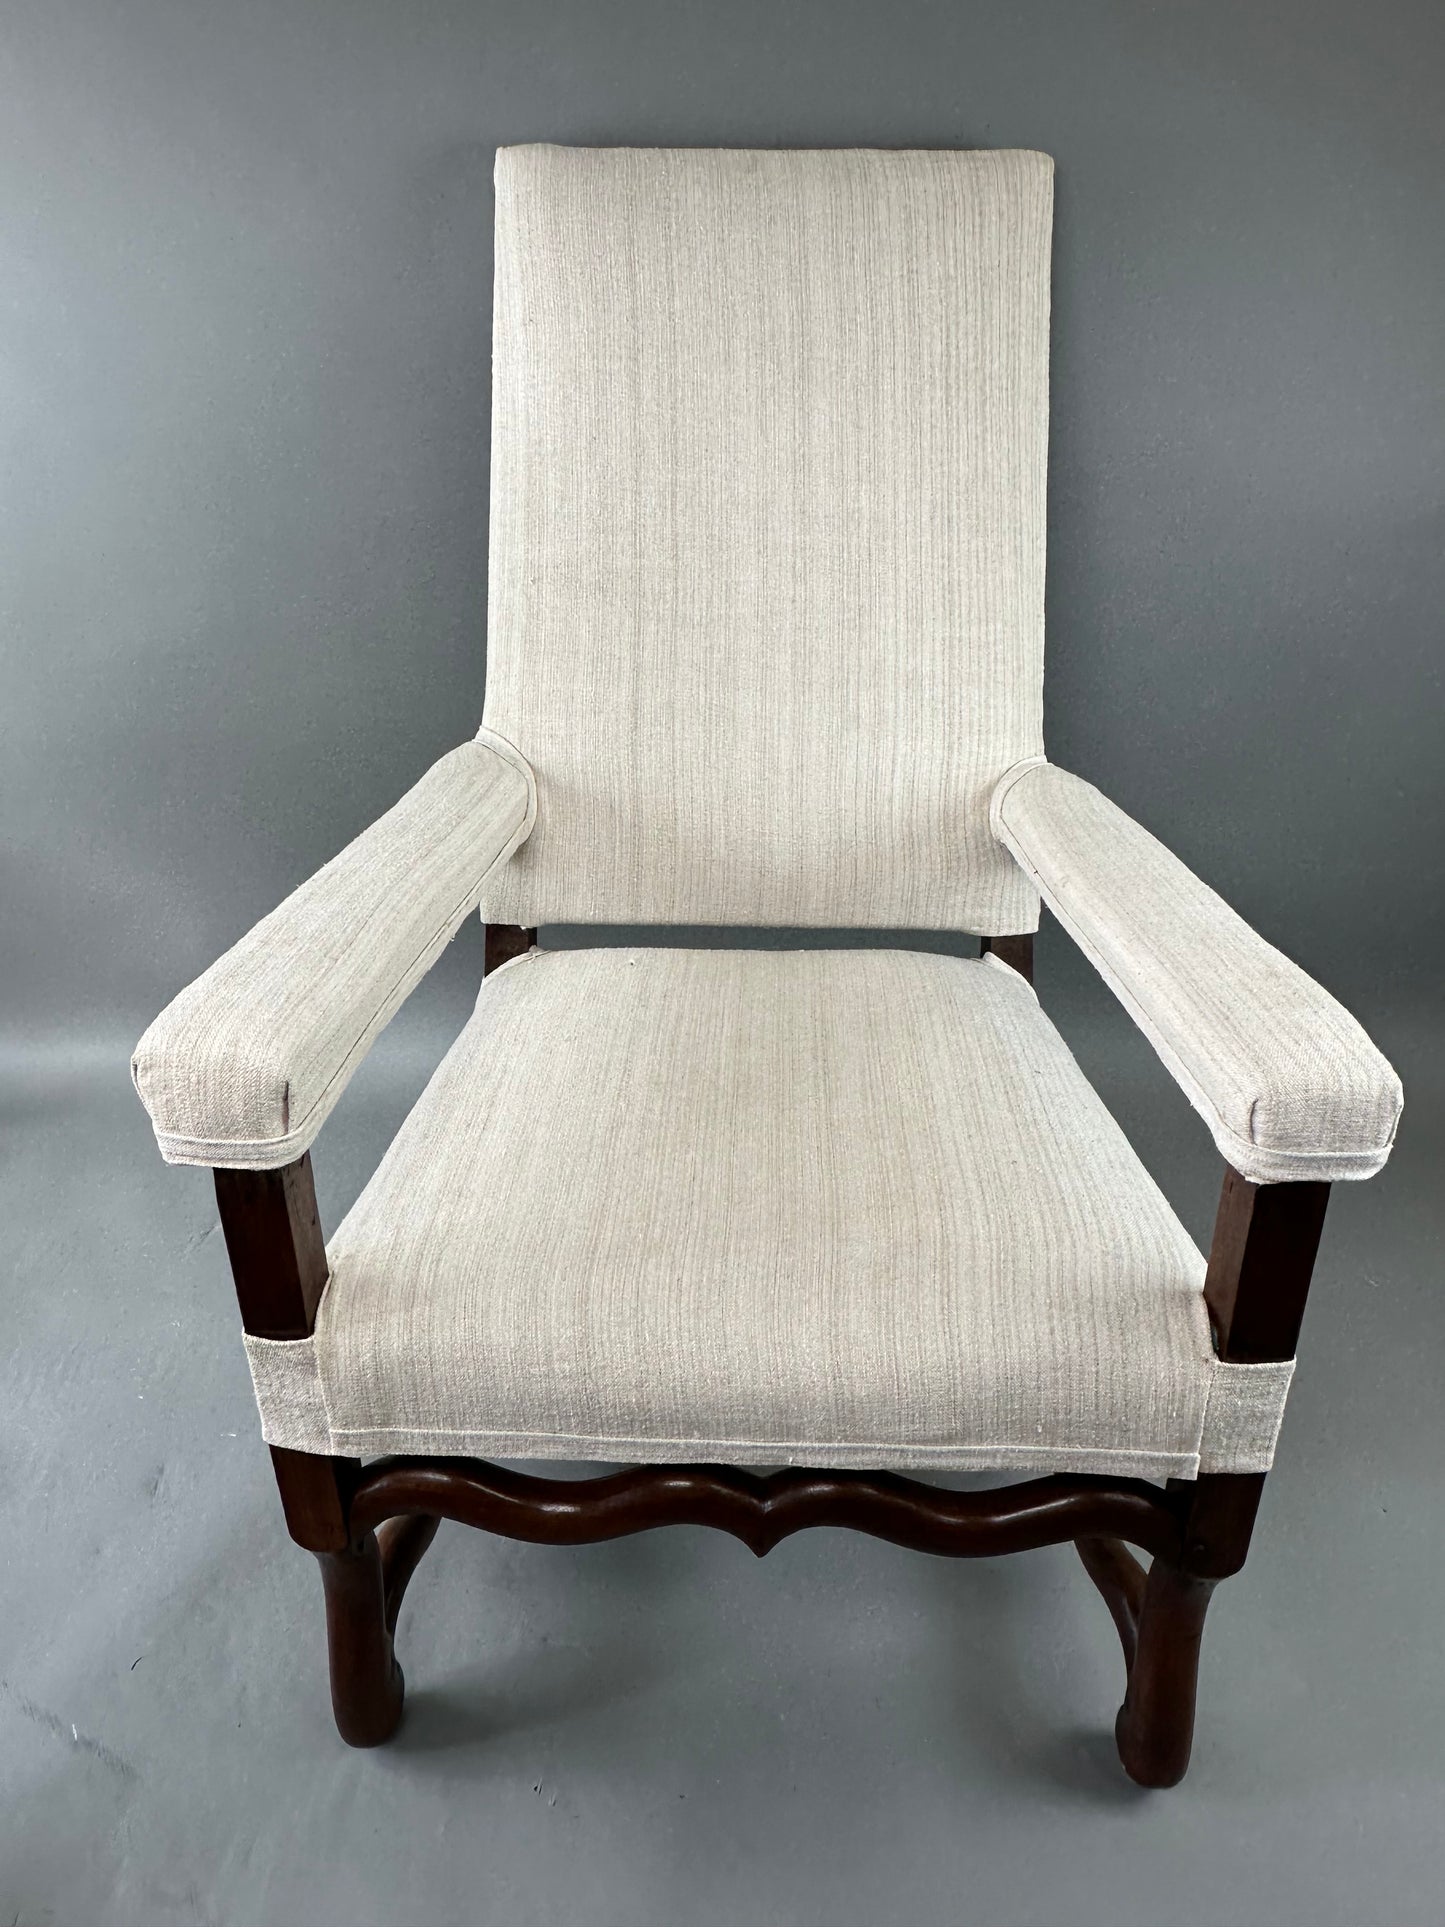 French Walnut Fauteuil Chair c1840